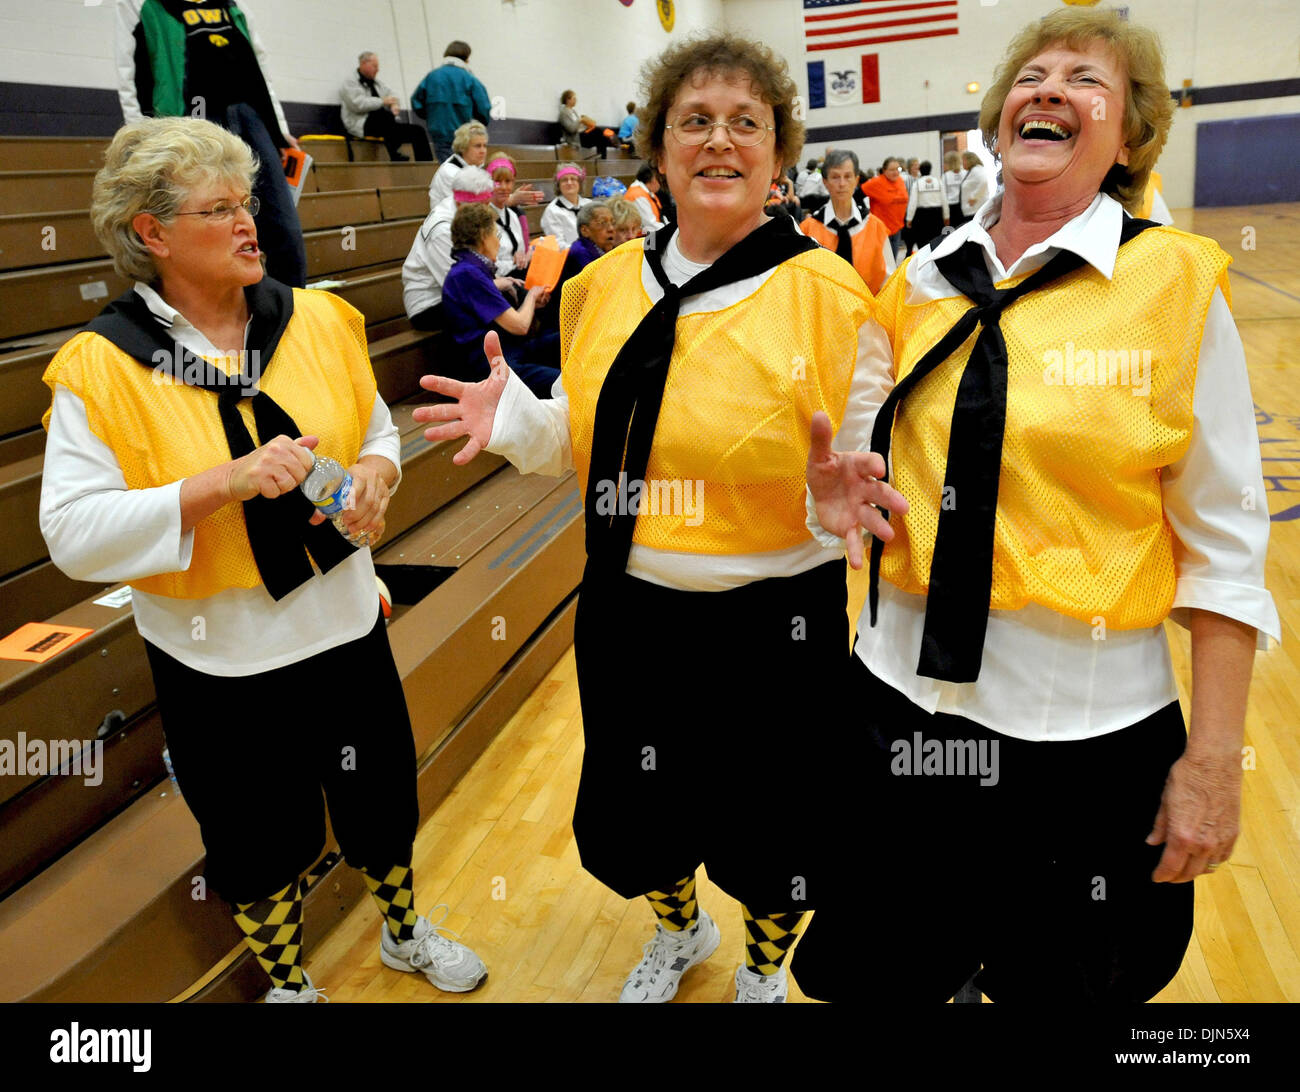 Mar 29, 2008 - Alburnett, Iowa, USA - Left to right, CAROLYN VEENSTRA, PAT DUER, and JEAN O'MALIA of the Ankey Honey Bees share a laugh after a Granny Basketball League game at the Alburnett High School gymnasium. Open to women over the age of 50, and played by rules modified from those established in the 1920's, granny basketball has become a mini-phenomenon in Iowa and other midw Stock Photo